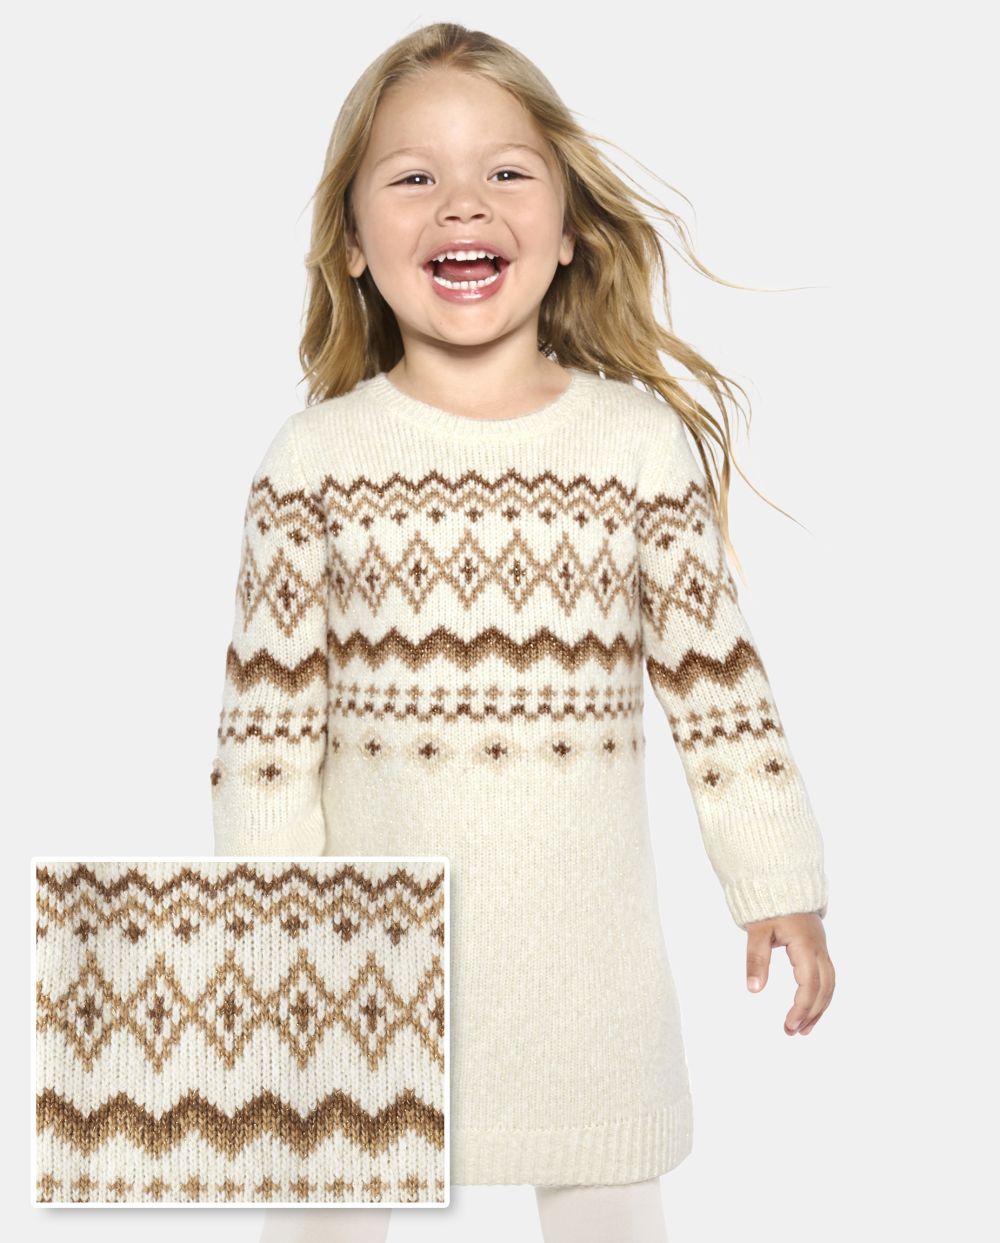 Tall Toddler Baby Long Sleeves Sweater Crew Neck Above the Knee Dress